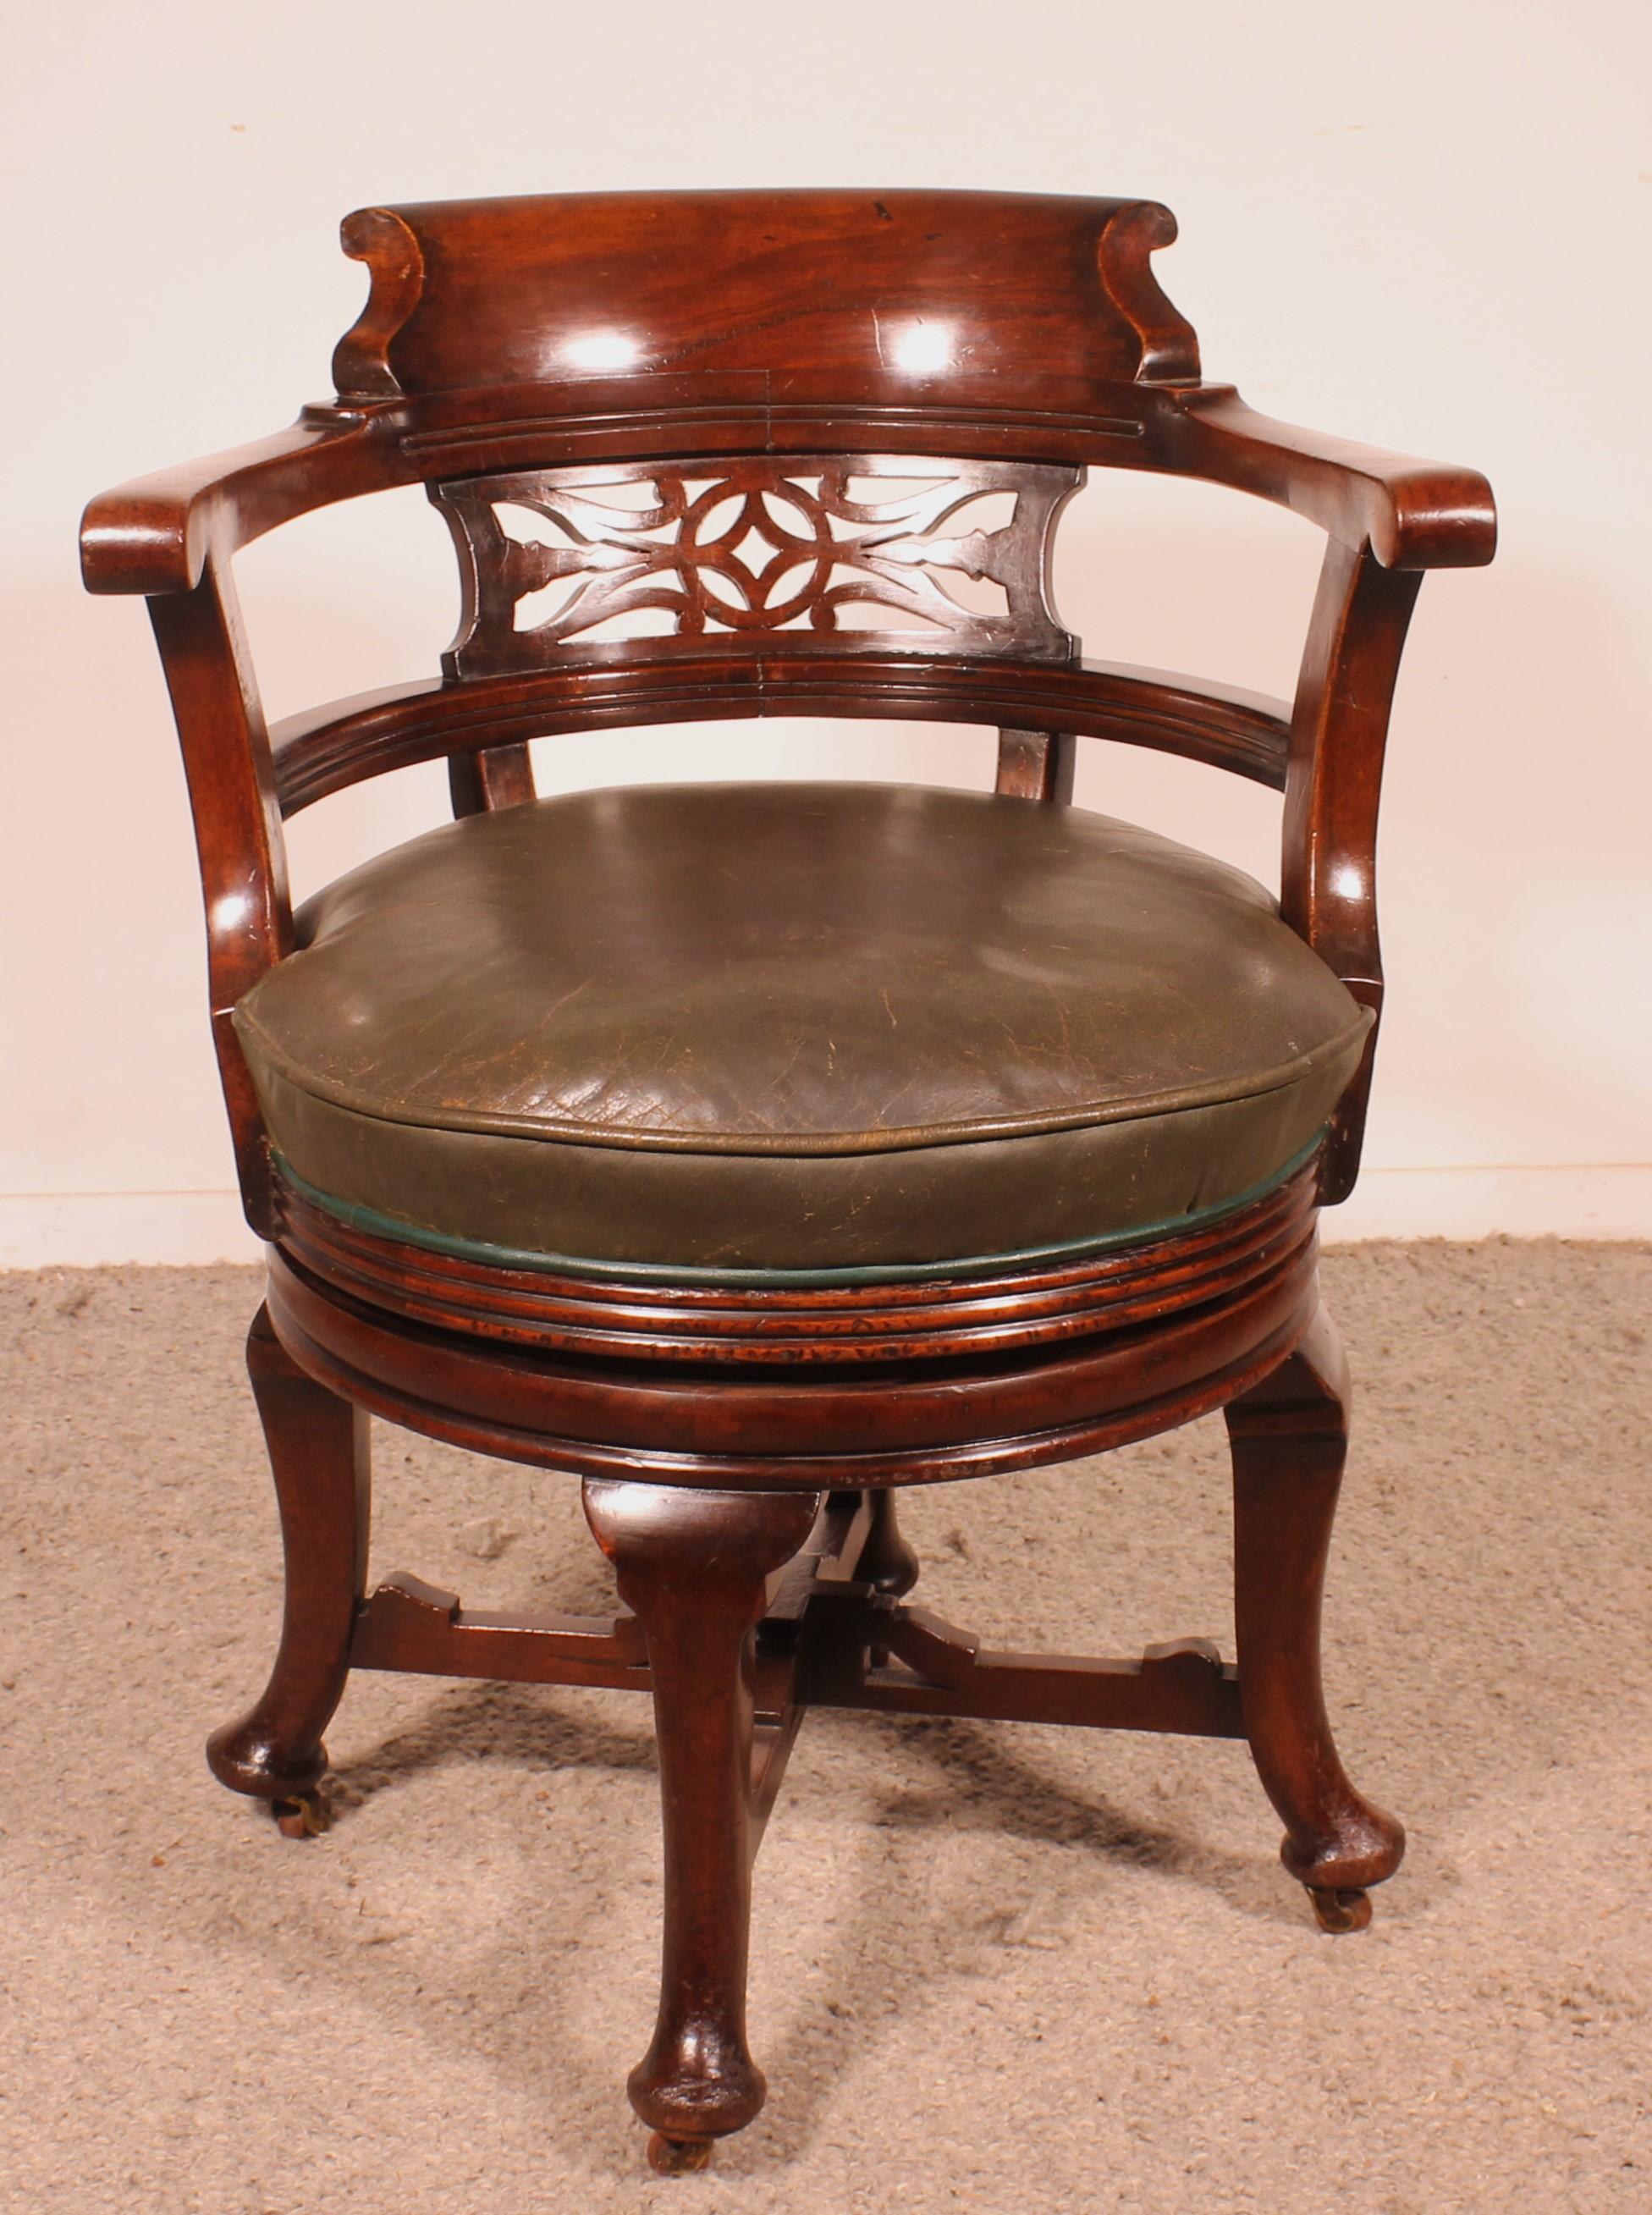 Rotating office desk armchair from English in mahogany from the 19th century

Beautiful quality of execution with  asculpted backrest

the round seat turns and rests on four legs connected by a wooden spacer and ending with casters
It is covered